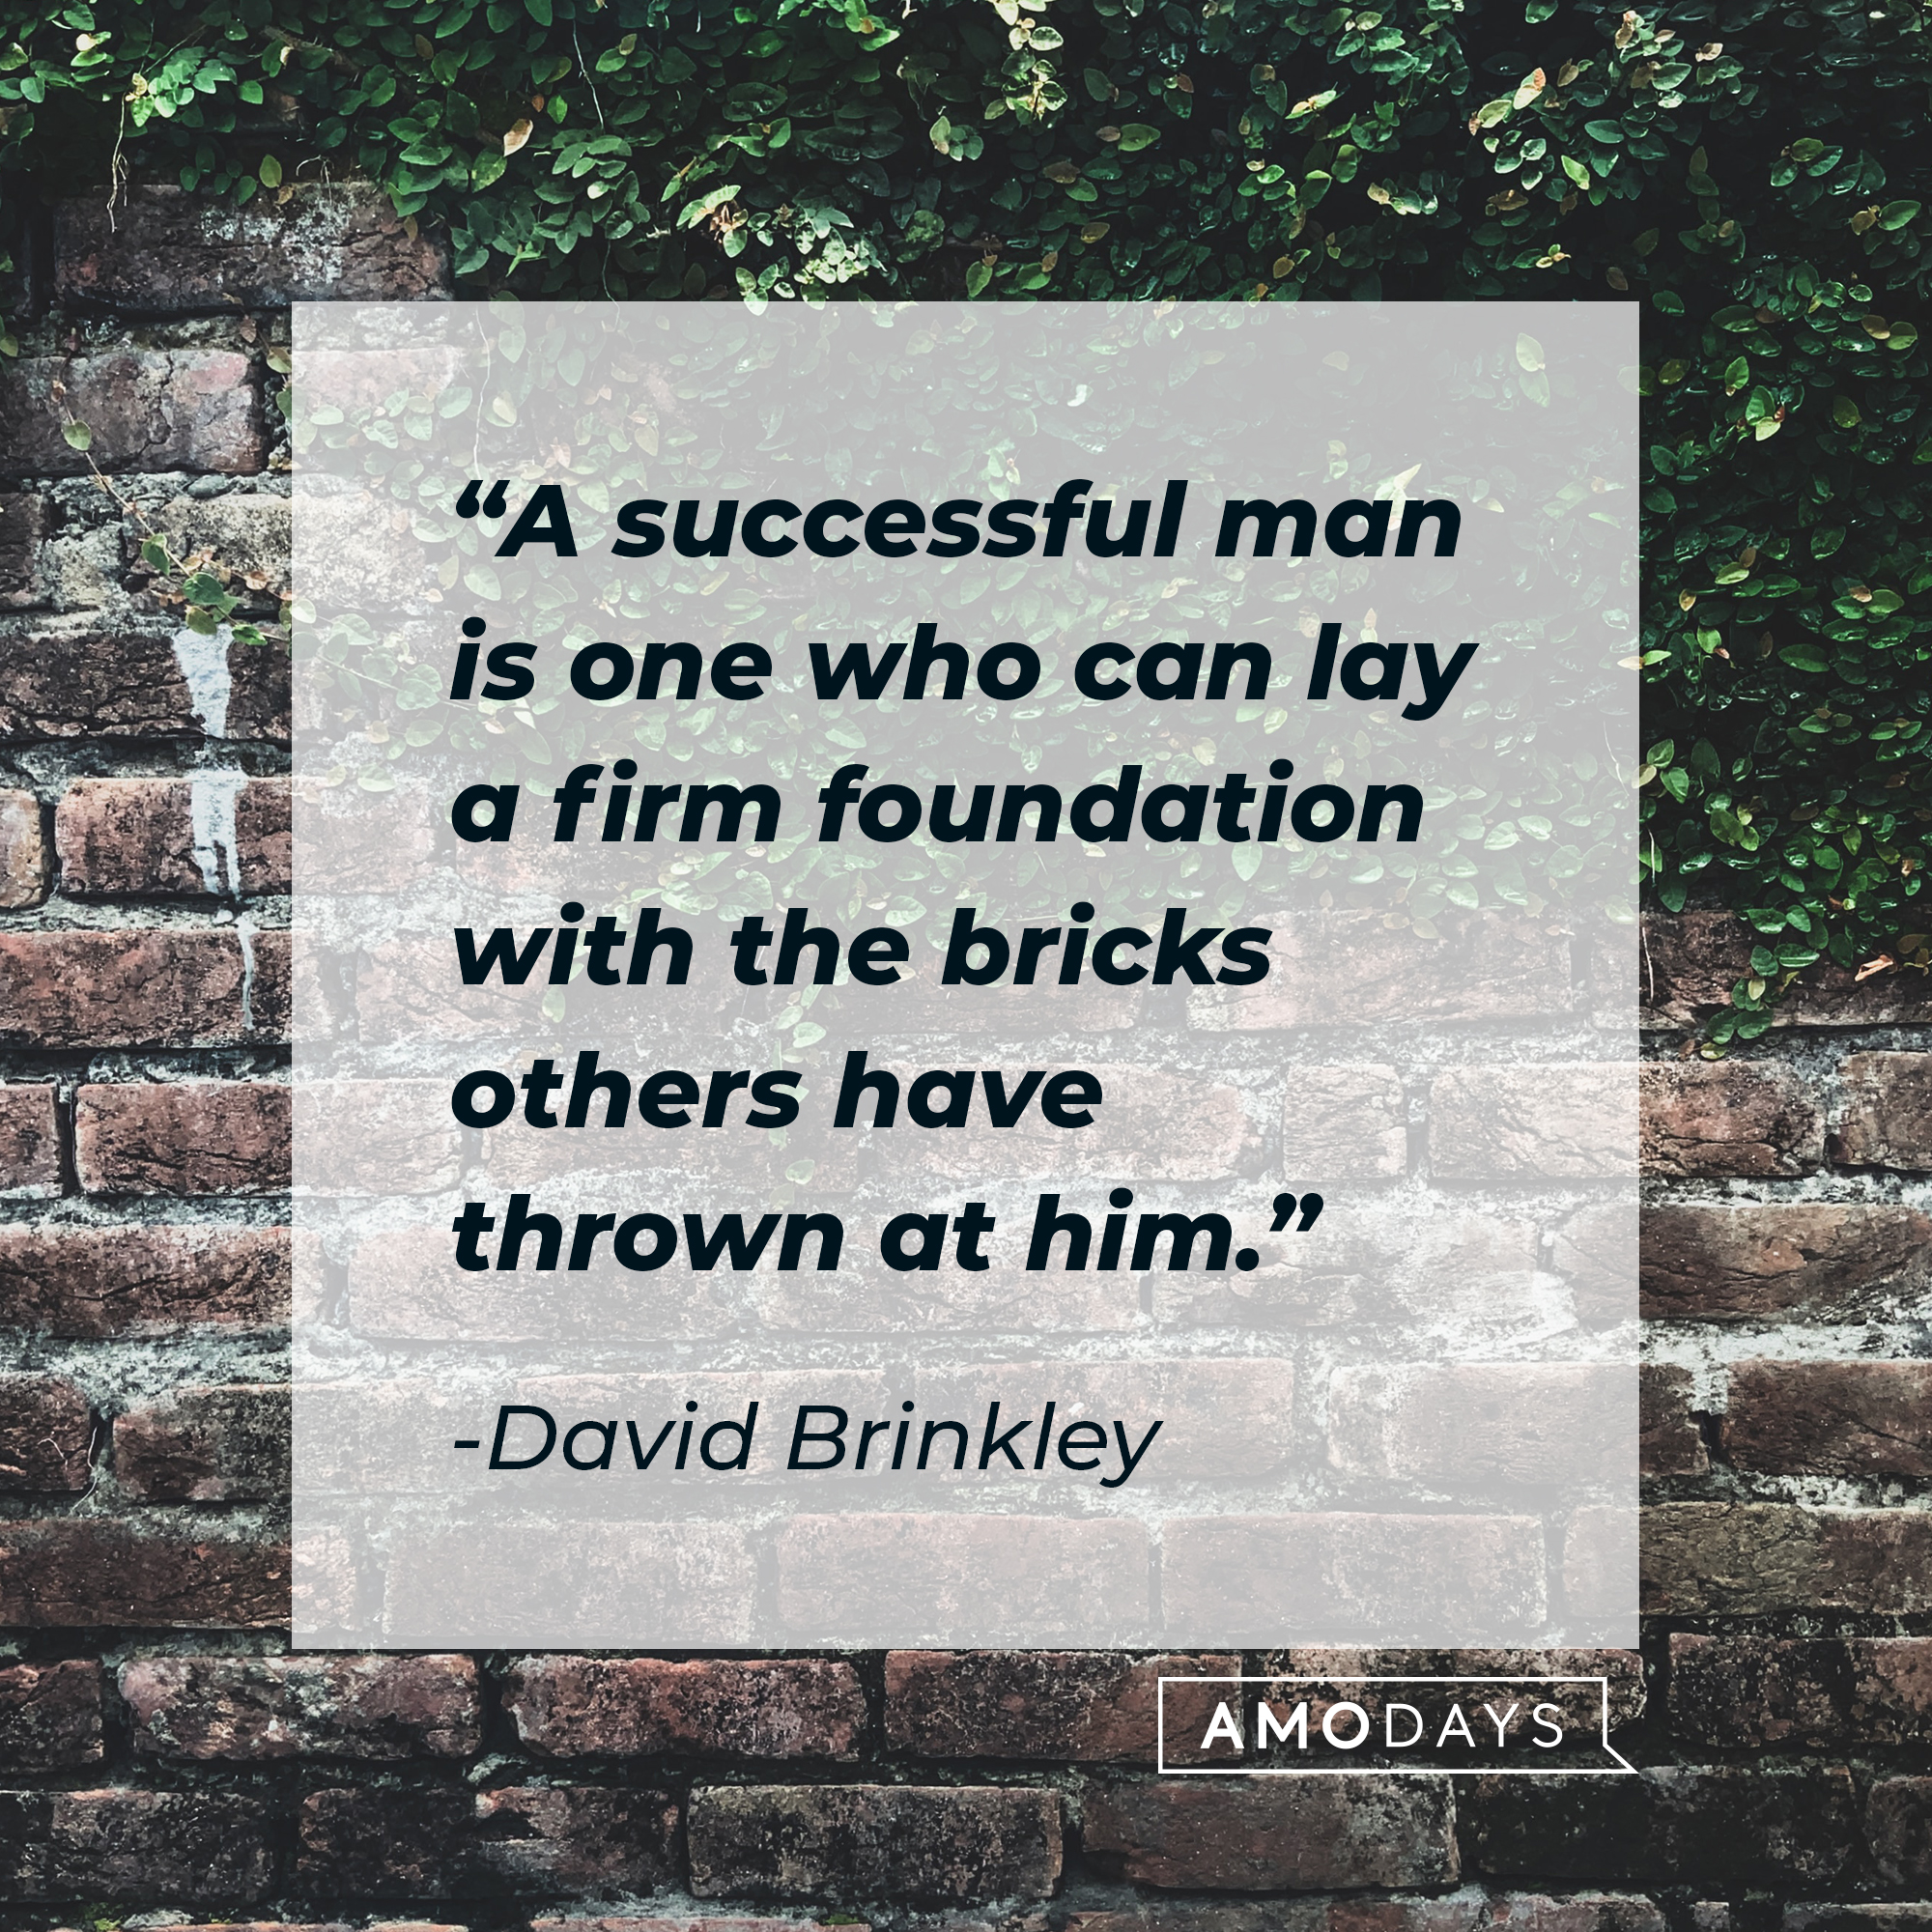 David Brinkley's quote: "A successful man is one who can lay a firm foundation with the bricks others have thrown at him." | Source: Unsplash